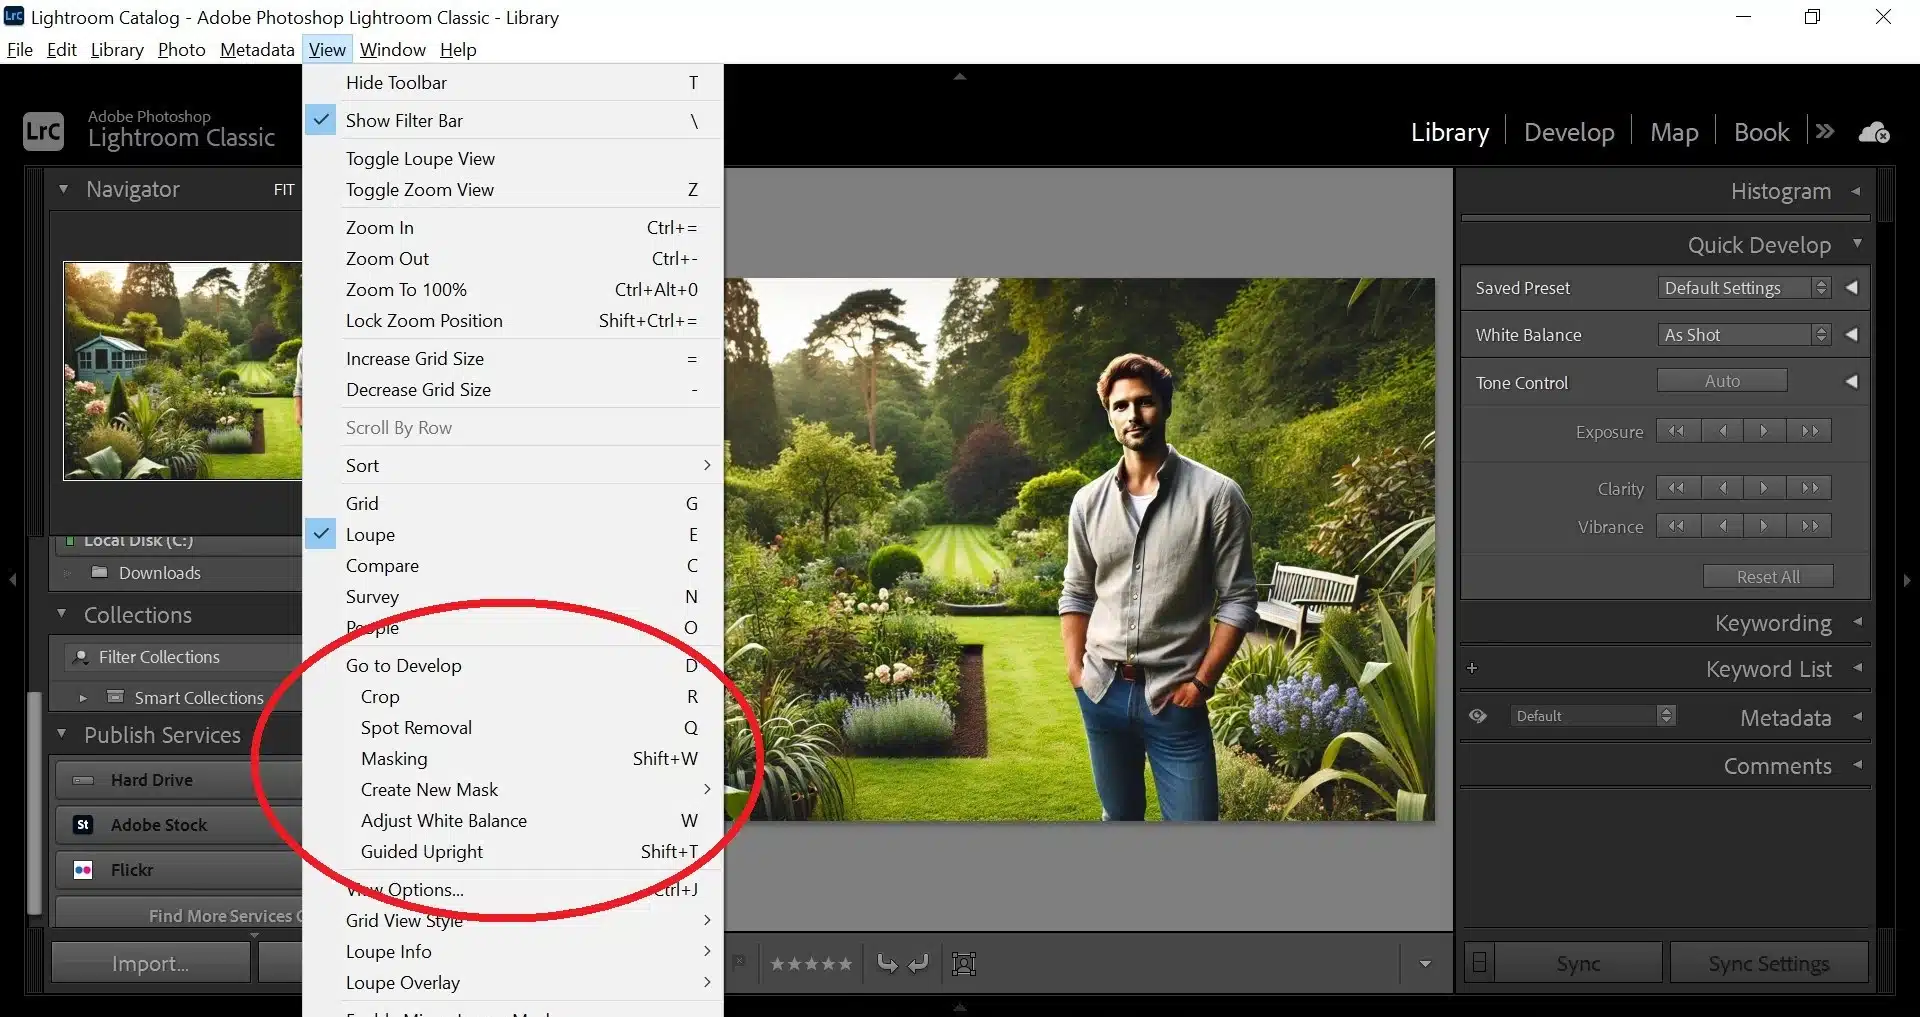 Adobe Lightroom interface showing the basic tools to edit portraits, with the View menu open and various options like Crop, Spot Removal, and Adjust White Balance highlighted.